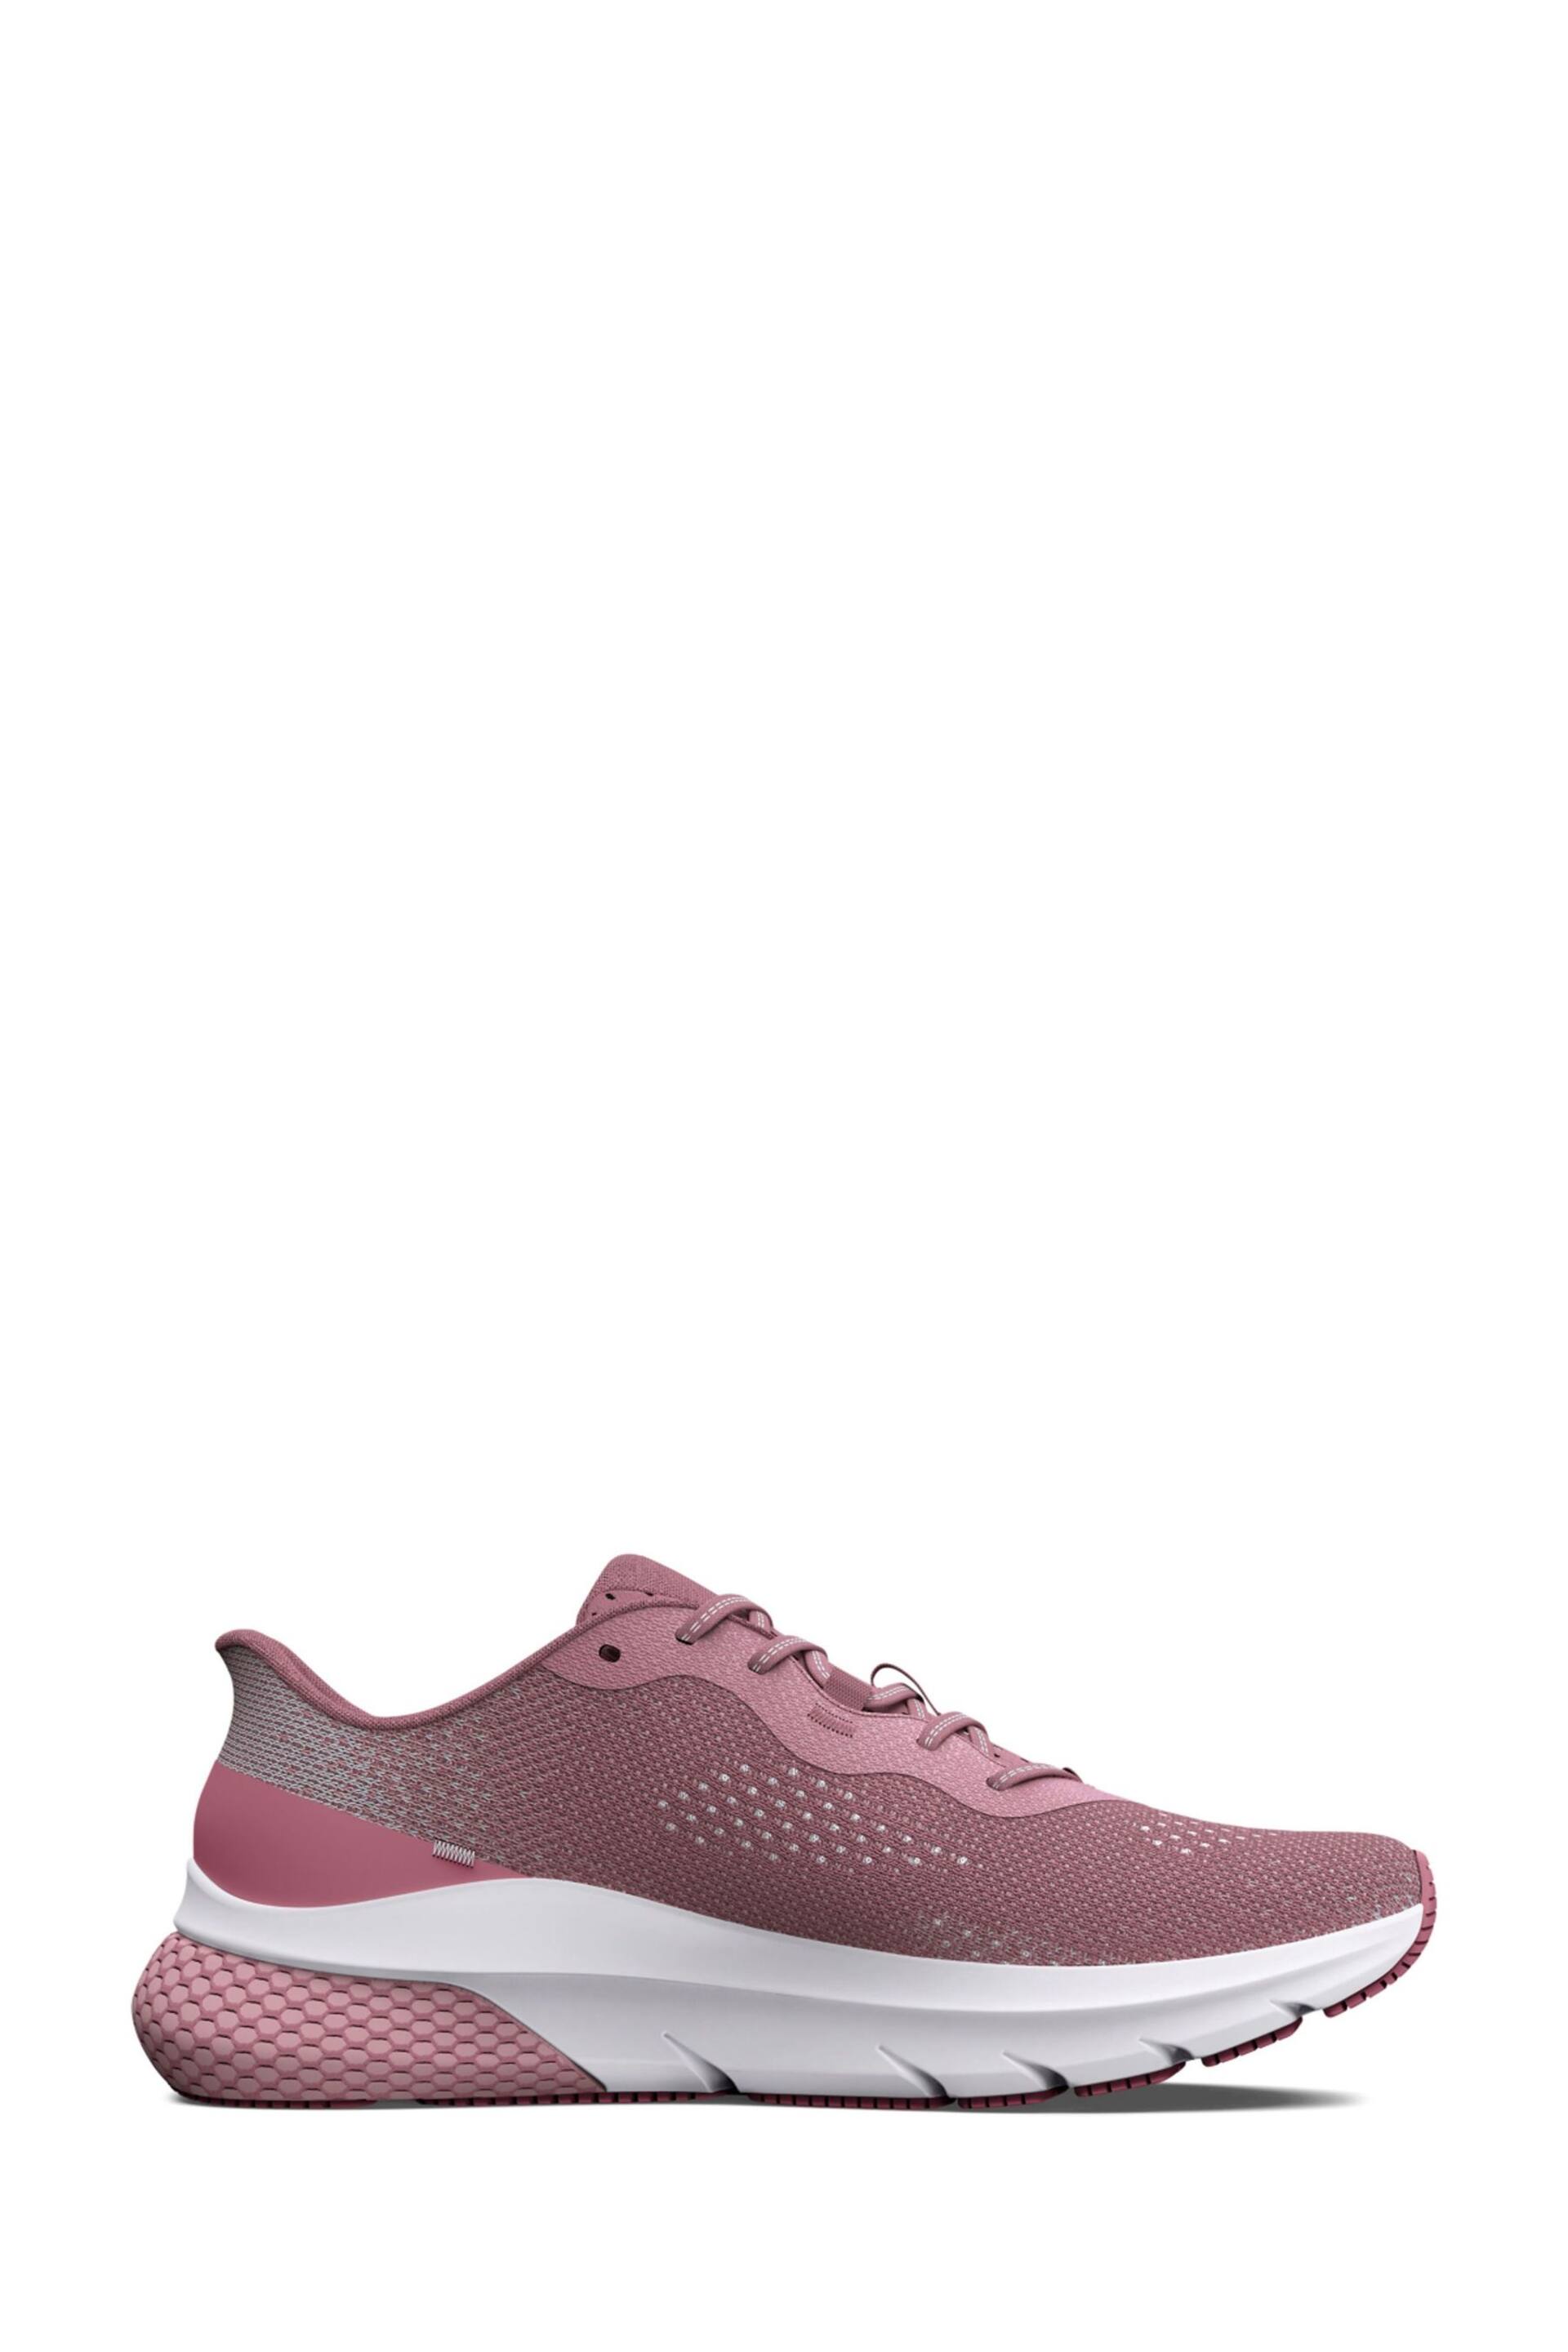 Under Armour Pink HOVR Turbulence 2 Trainers - Image 4 of 8